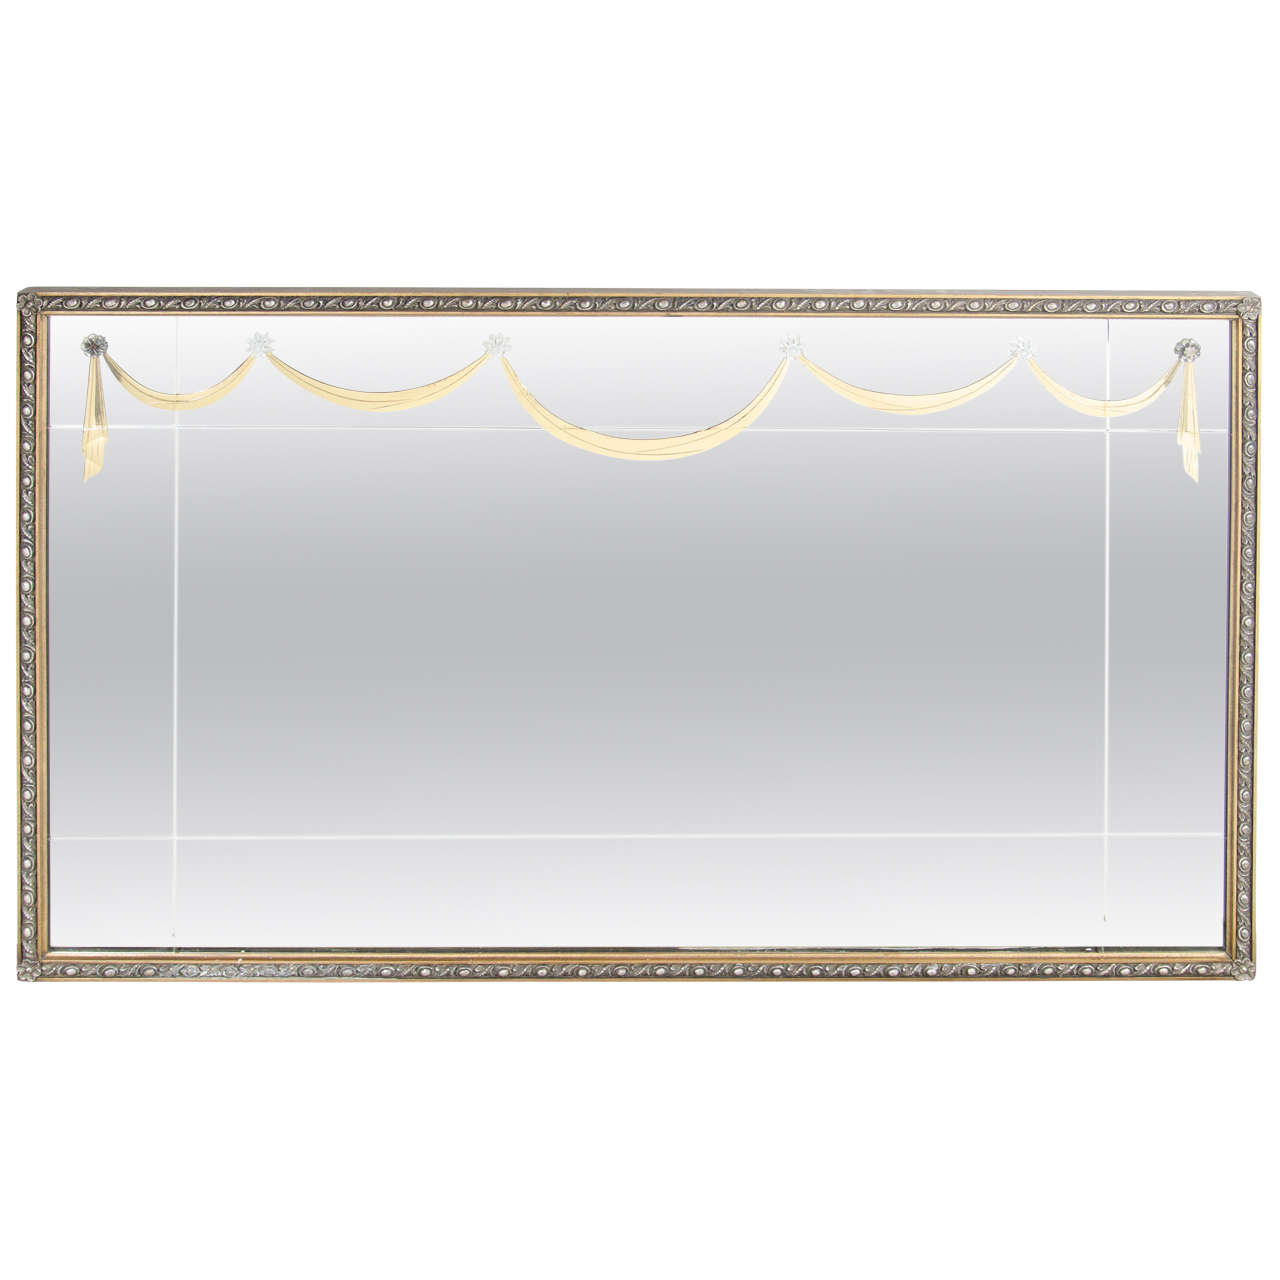 1940s Gilt Mirror with Neoclassical Motifs & Lucite Appliqués by Grosfeld House